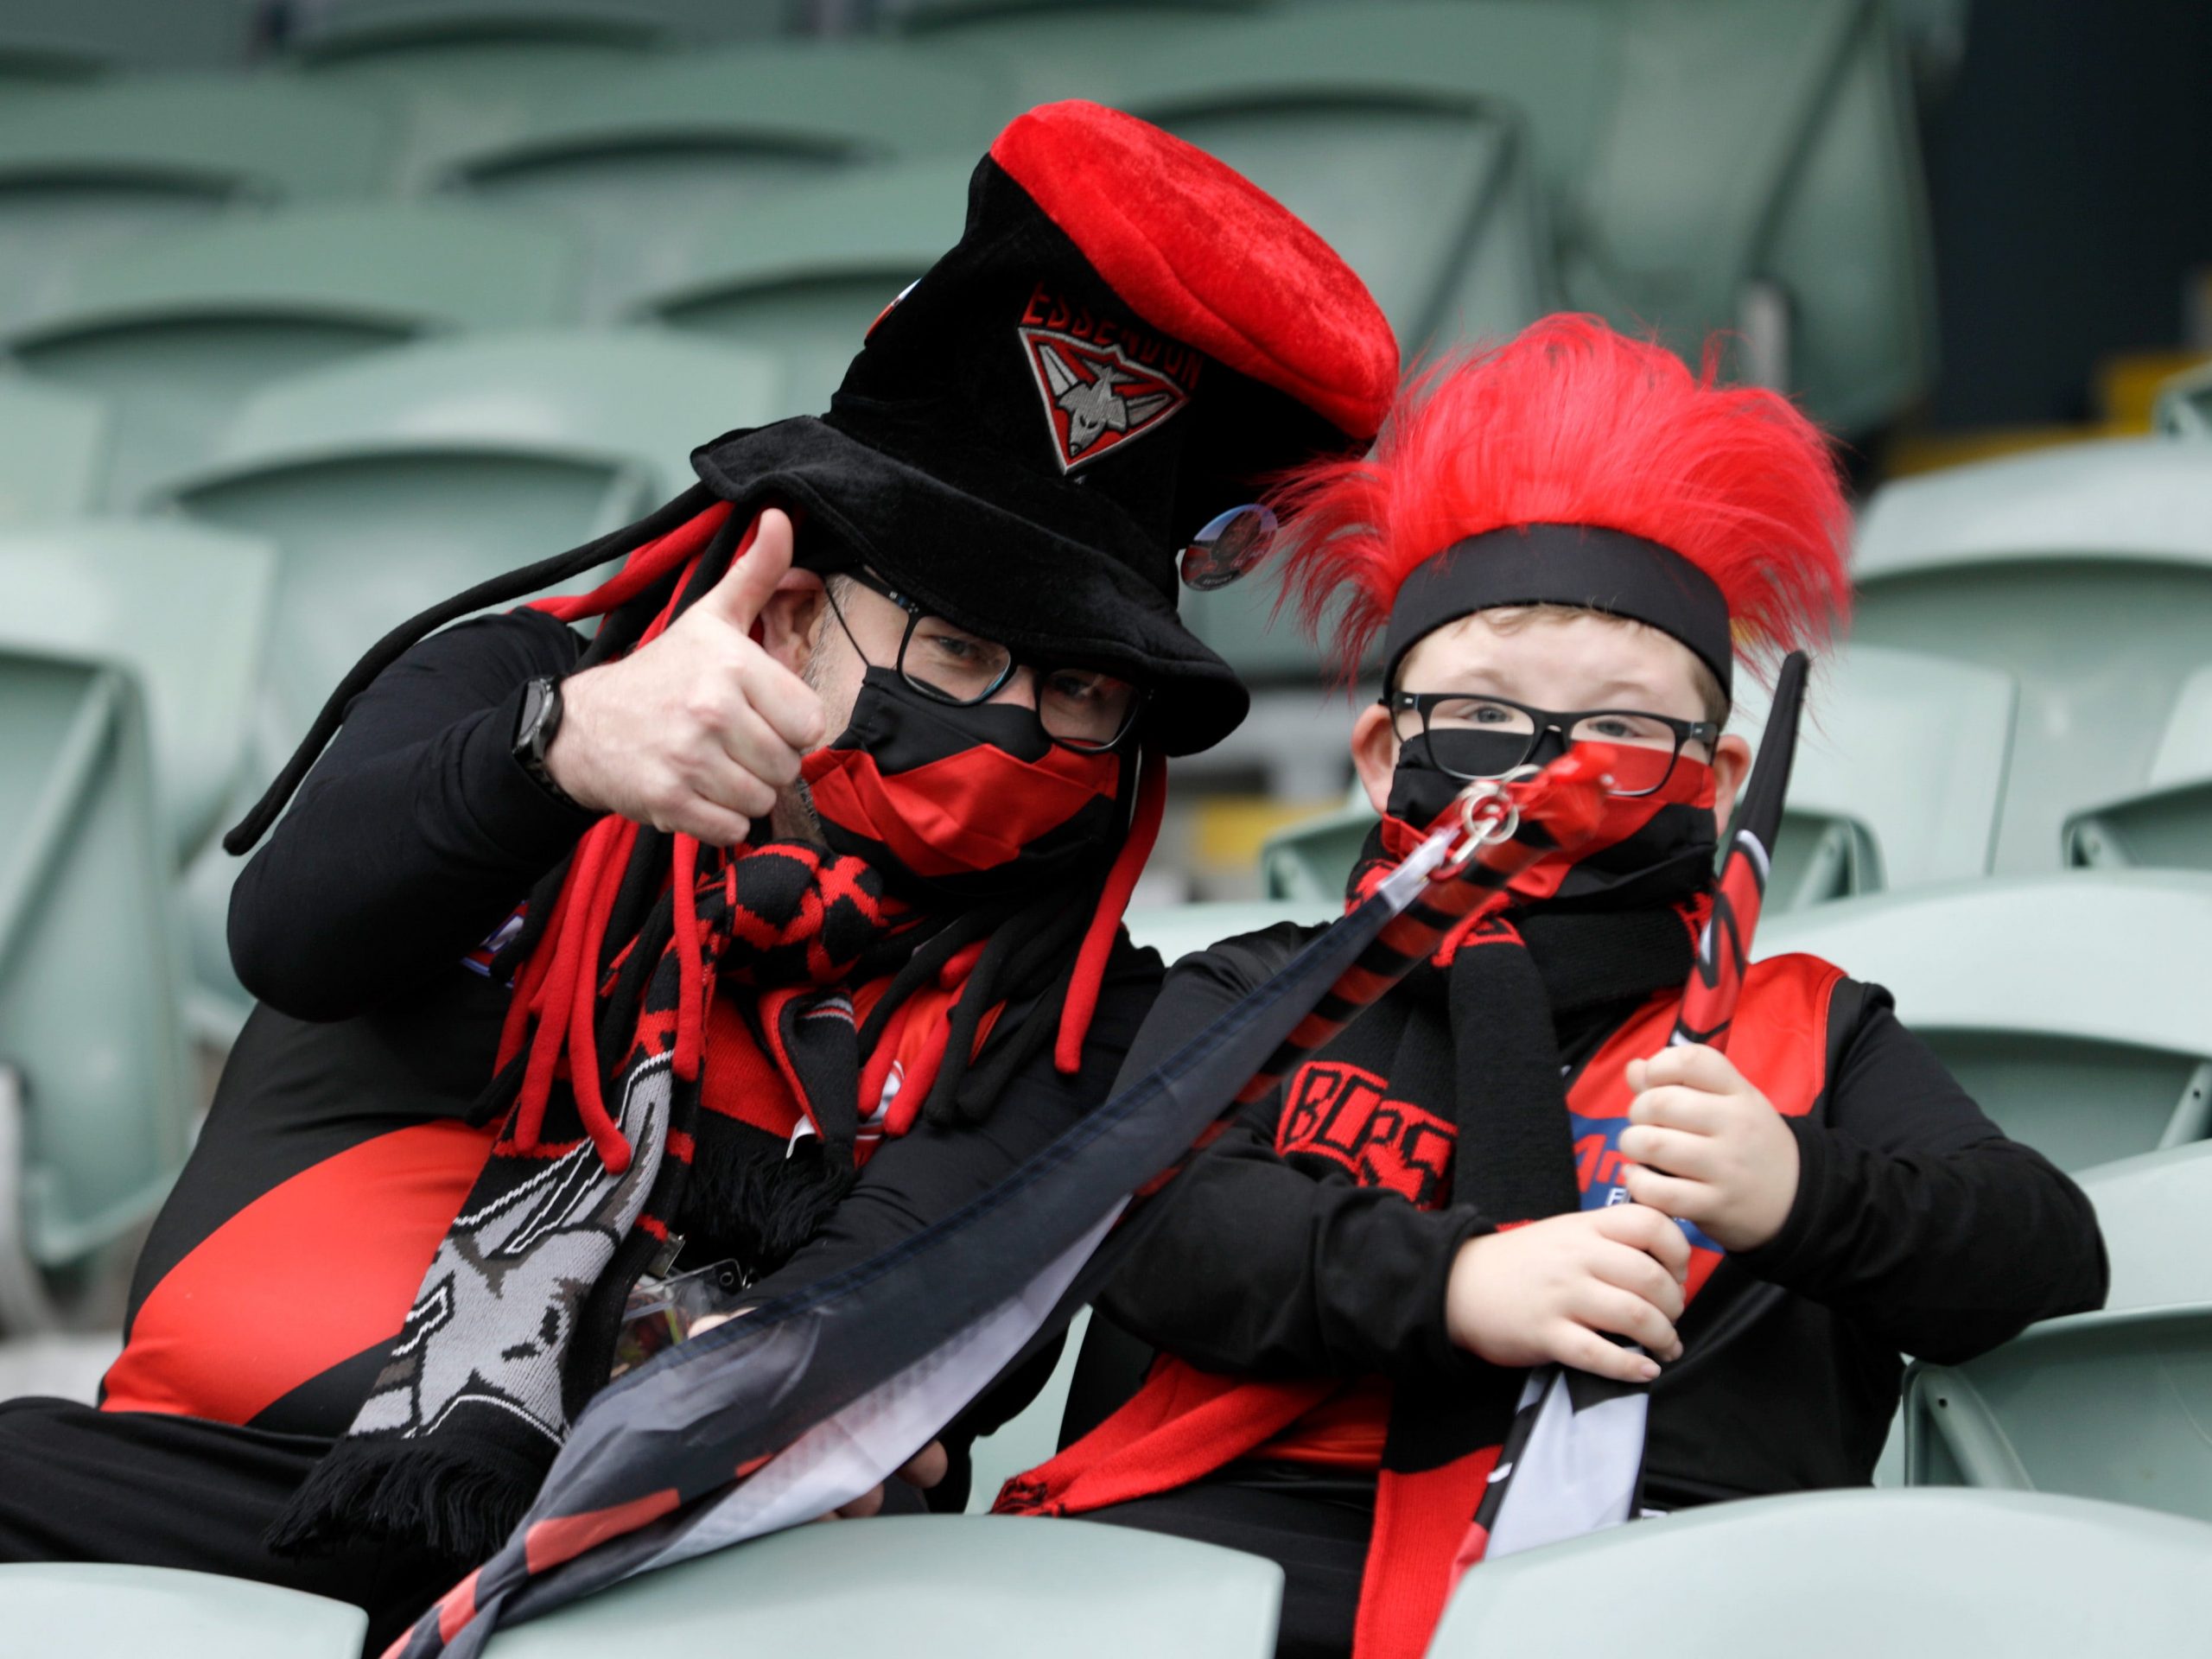 Fans arrive for the 2021 AFL First Elimination Final match between the Western Bulldogs and the Essendon Bombers at University of Tasmania Stadium on August 29, 2021 in Launceston, Australia.